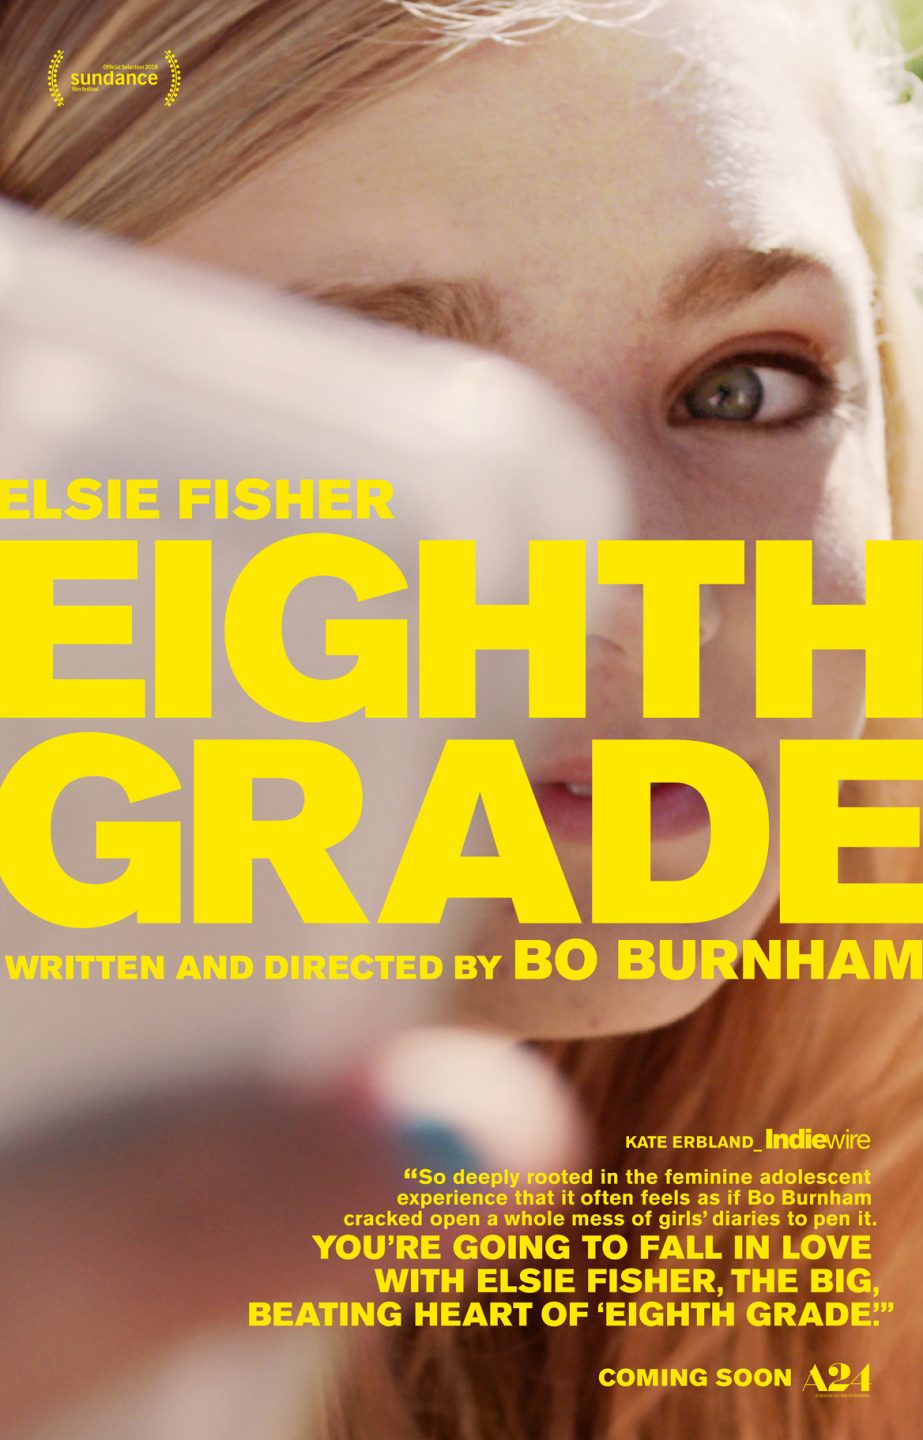 Eighth Grade poster (A24 Films)